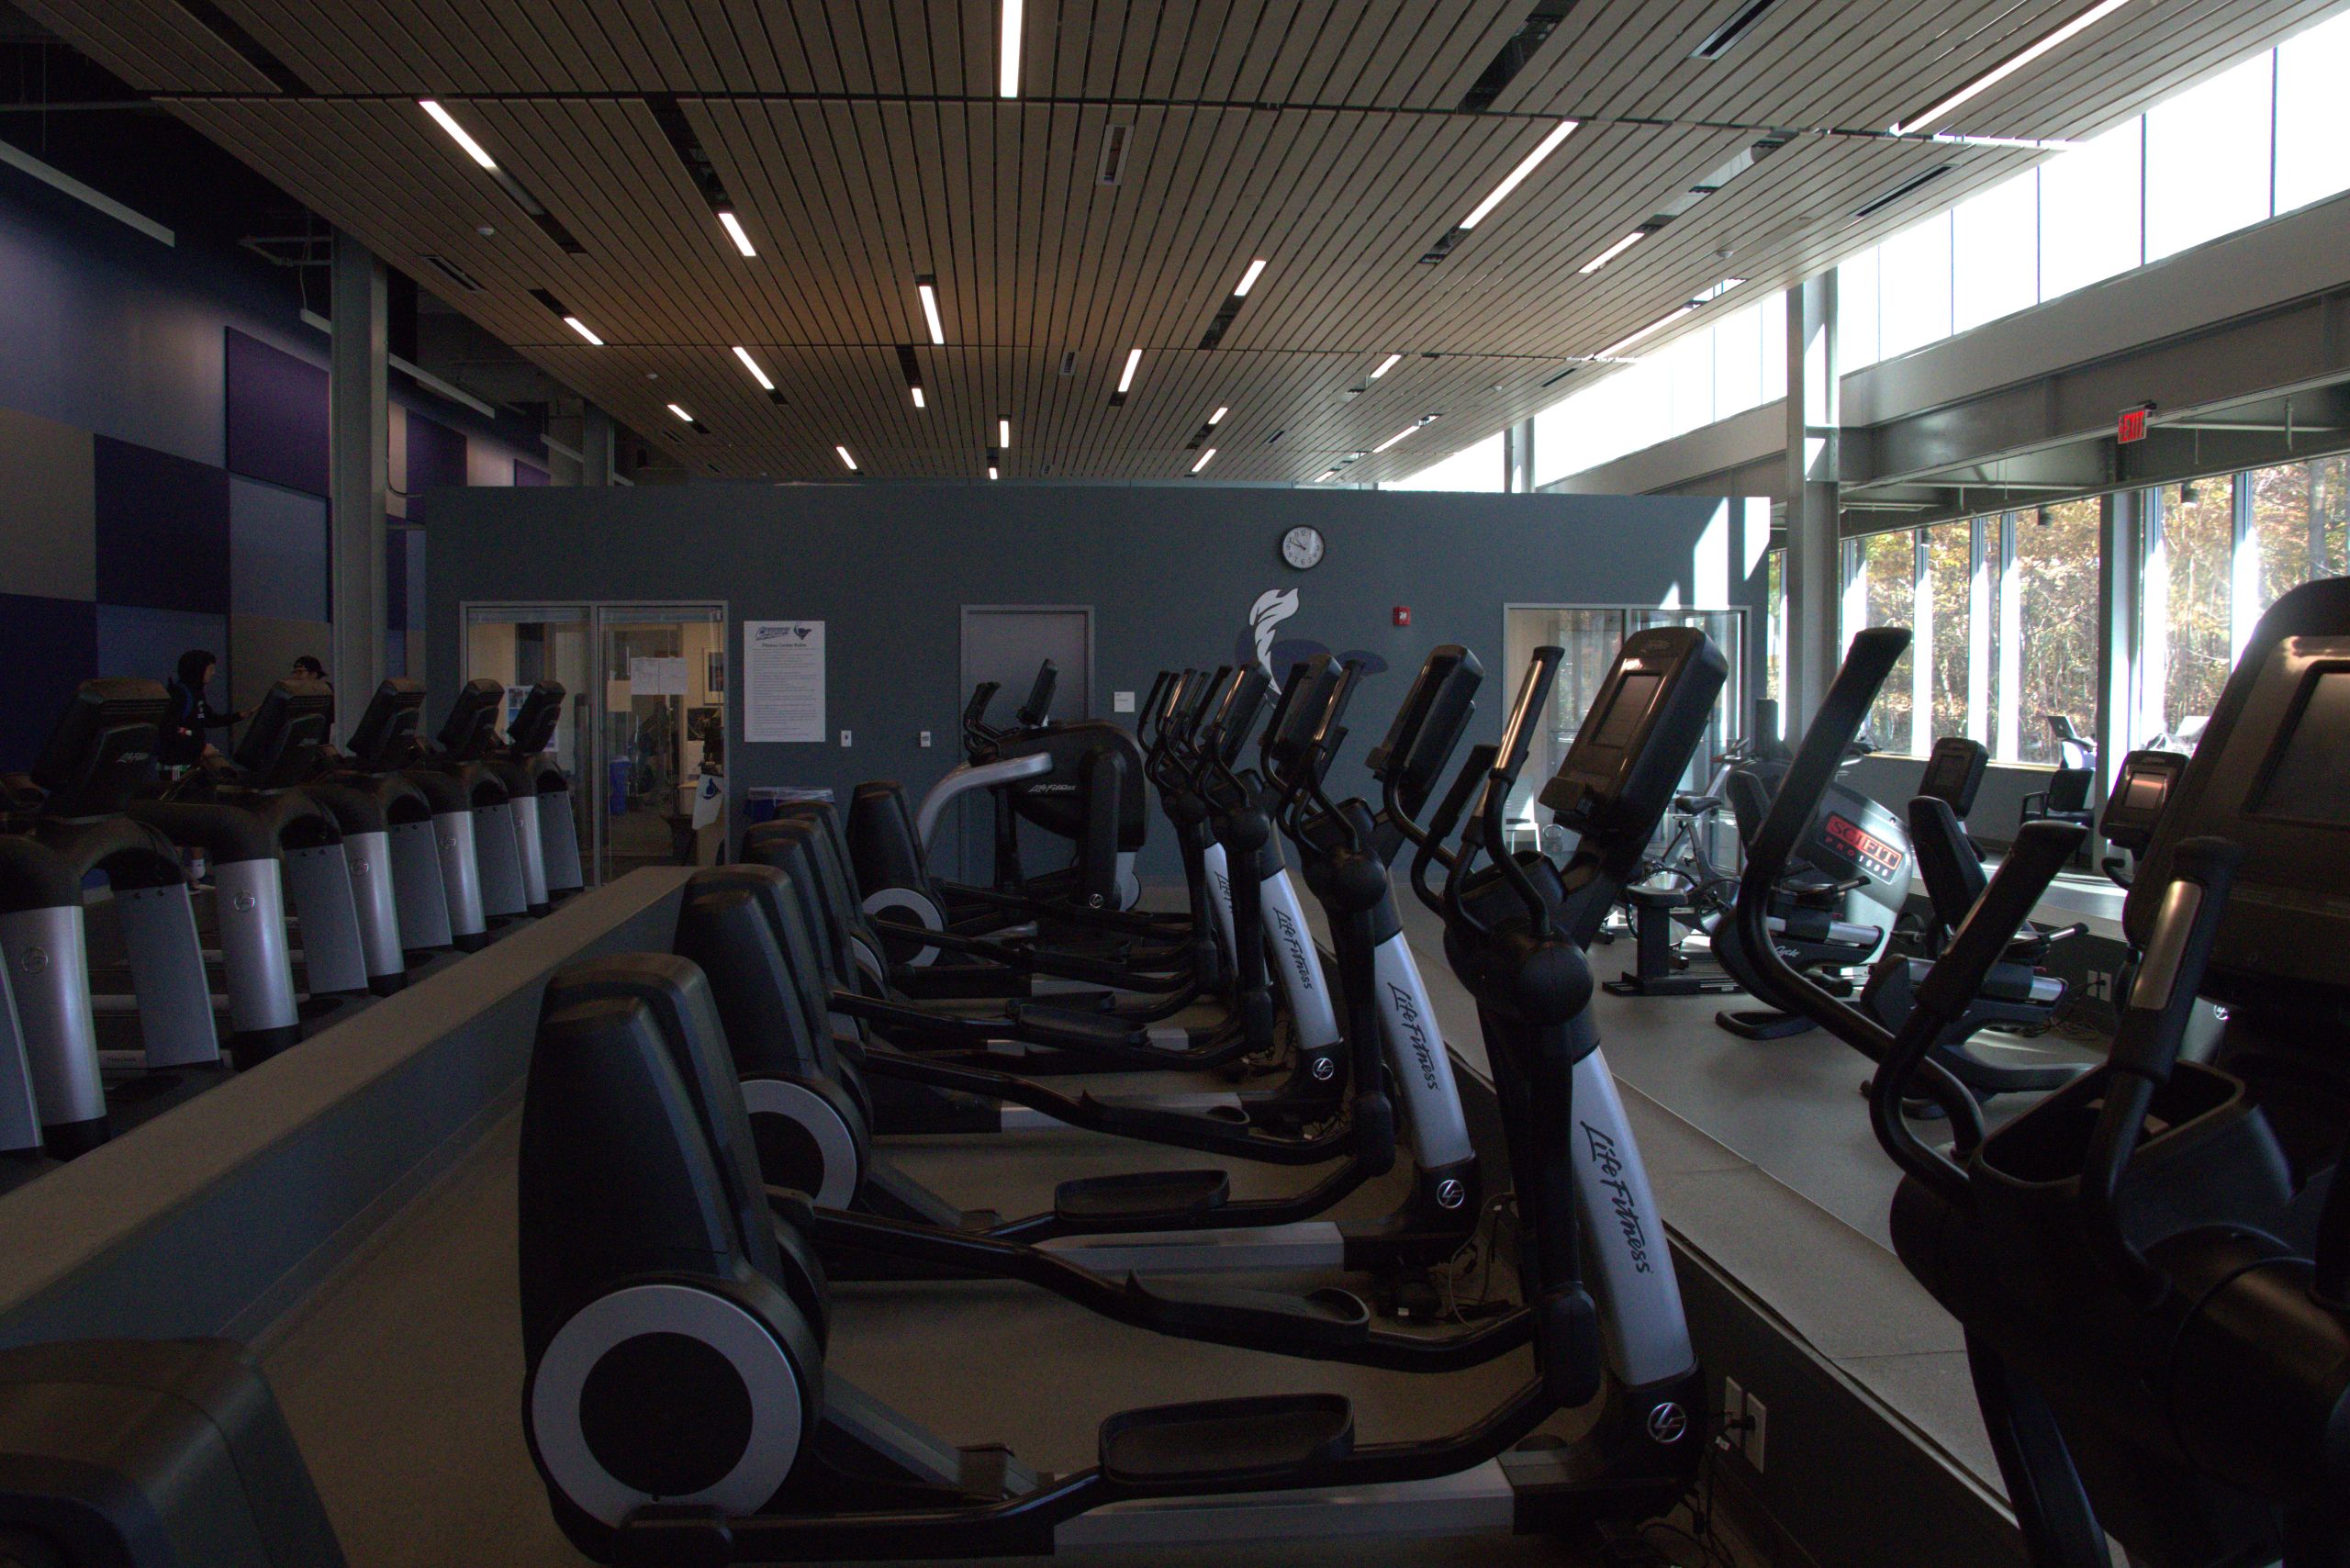 Cabrini's fitness center, located on the upper level of the Dixon Center. Photo by Ryan Byars.